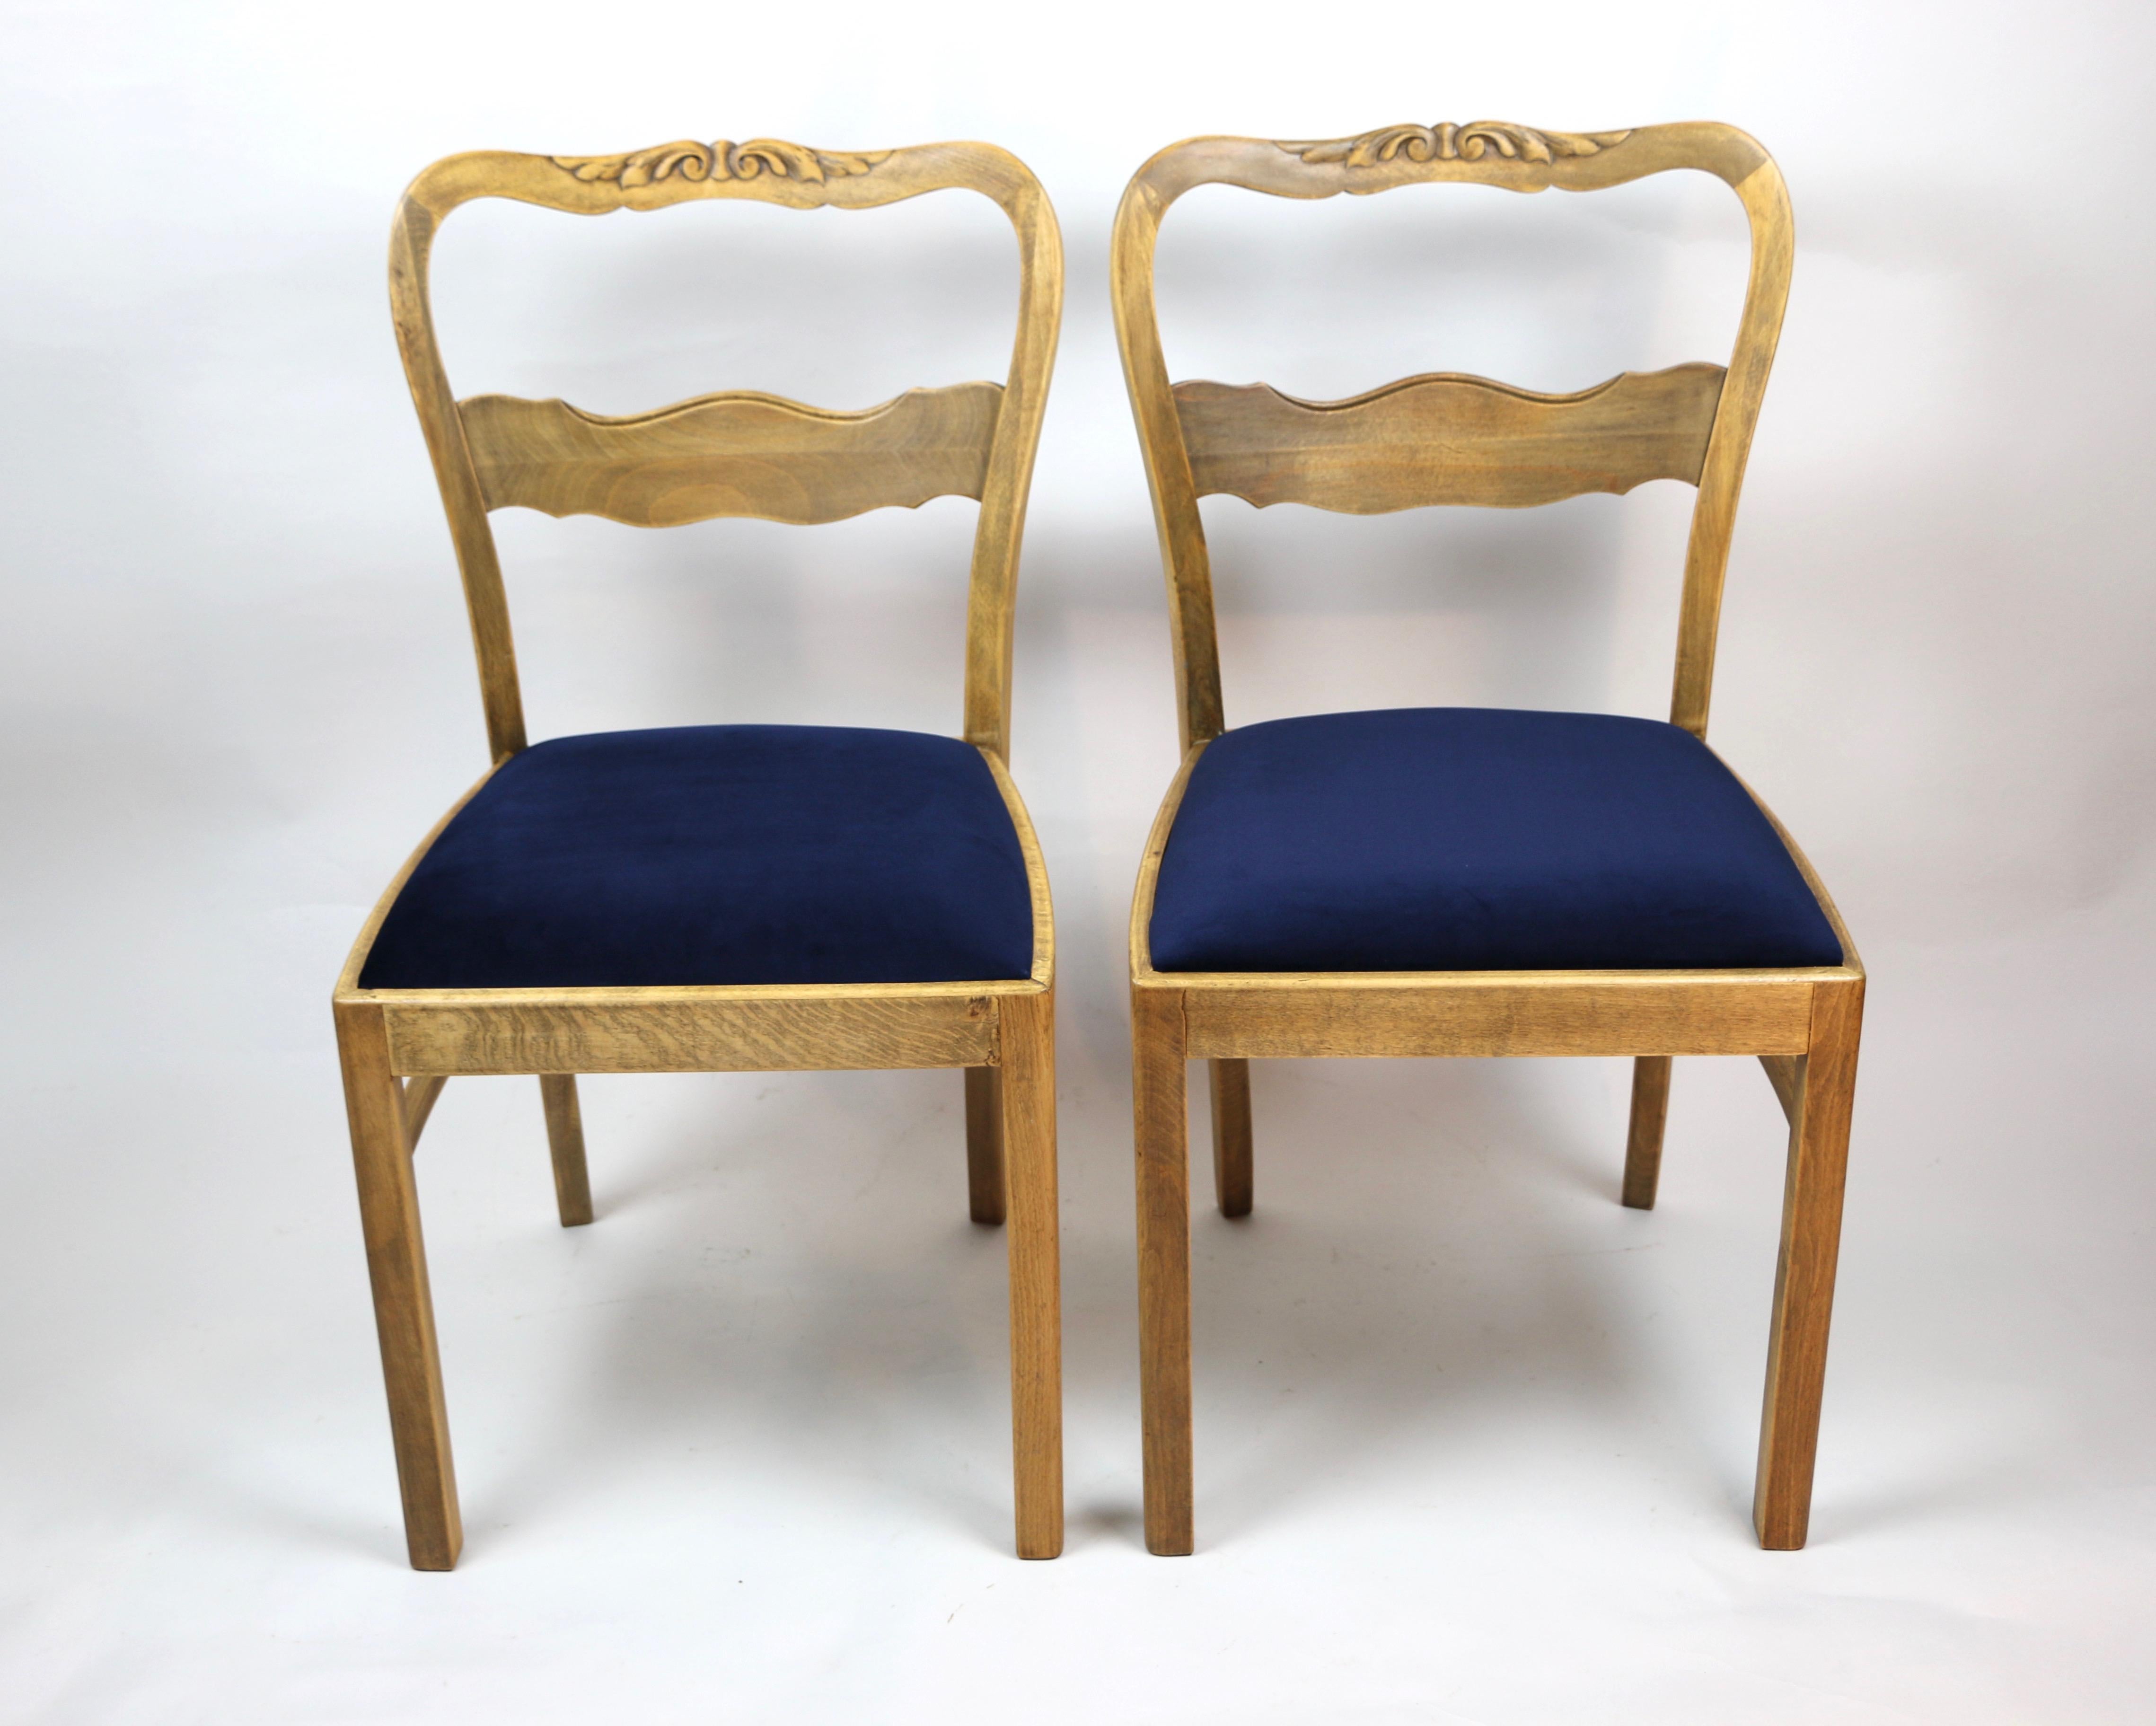 Set of two blue chairs from 1960s produced in Germany, new upholstery covered with velvet fabric in fashionable blue color. Wooden elements in natural oak color. Completely restored. Very solid construction and condition.

Dimension: H 87 x W 47 x